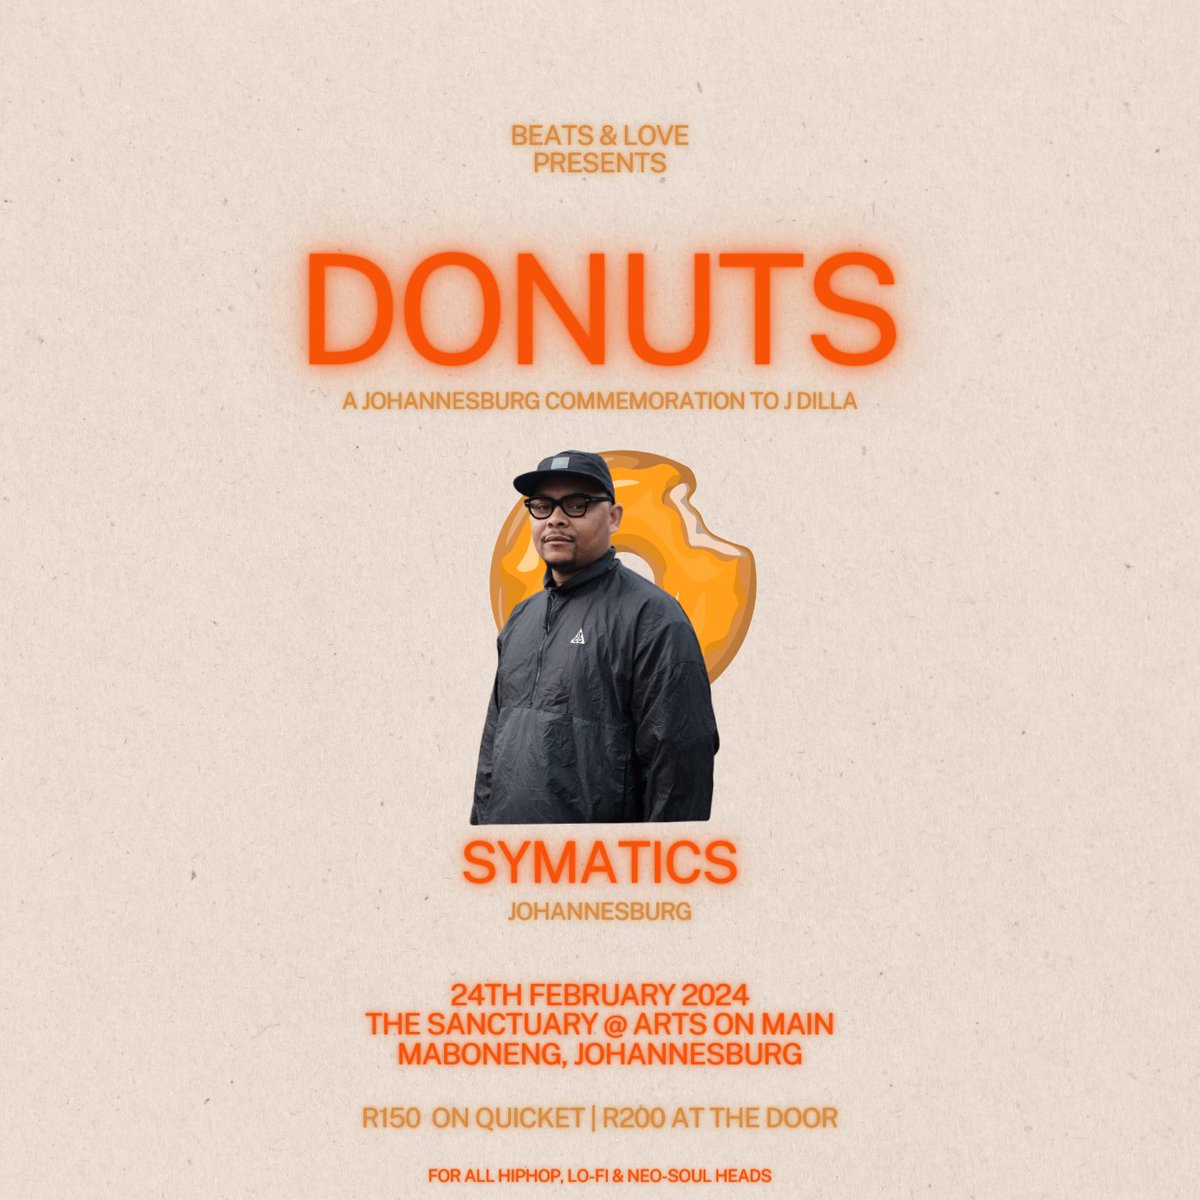 Symatics, is a Johannesburg-based artist, DJ and one half of Weheartbeat, he’s shared stages with some of the biggest music makers around the globe including Masego, Mndsgn, K’naan, Soulection and Freddie Joachim, to name a few.  Check Him Out Live At DONUTS on the 24/02/24.